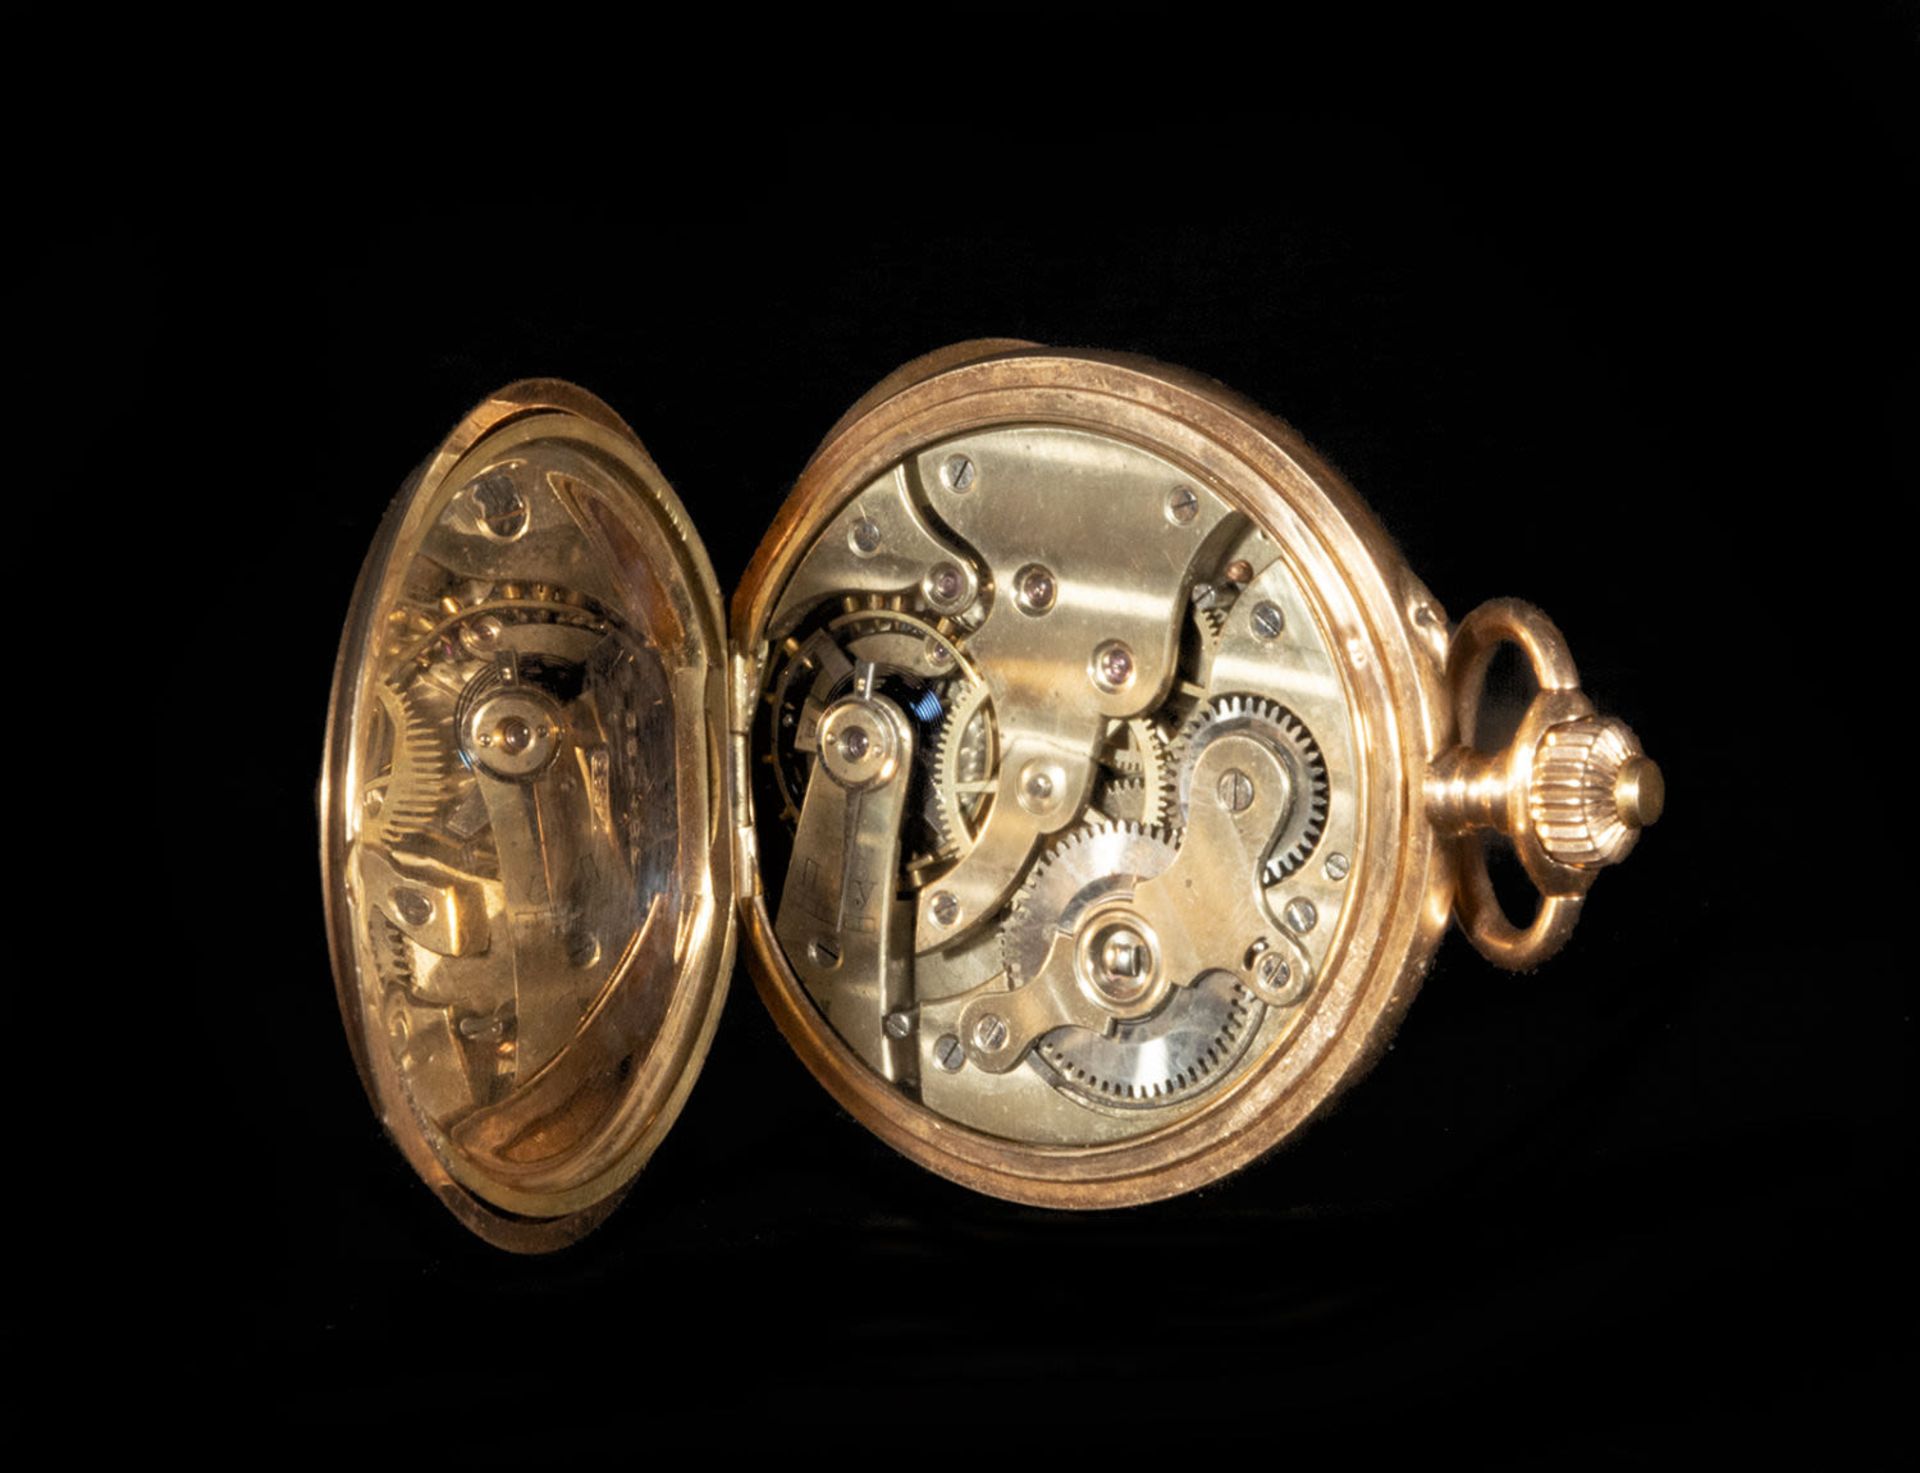 Elegant Paul Buhre/Faber Type pocket watch with 14k gold case from the year 1910-1911, .583 hallmark - Image 4 of 4